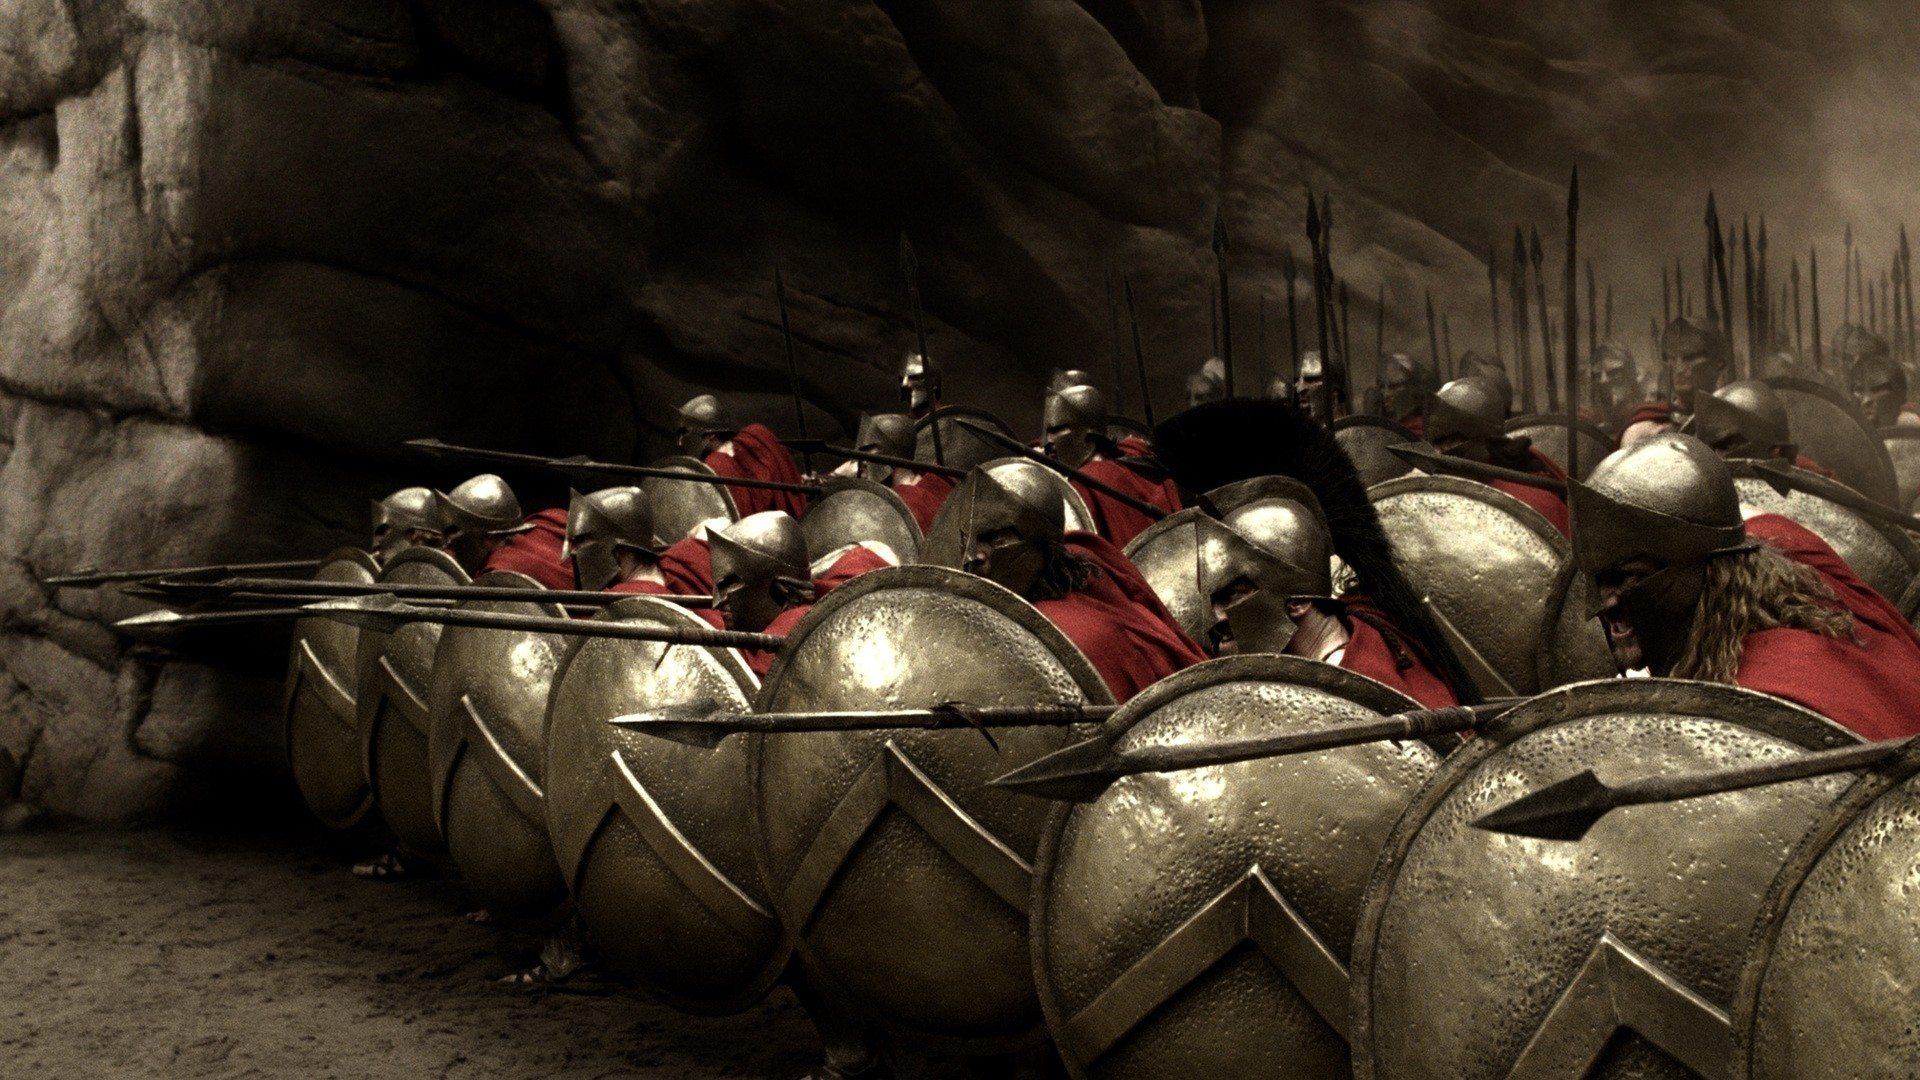 300 Movie Wallpapers in HD - Great Spartans